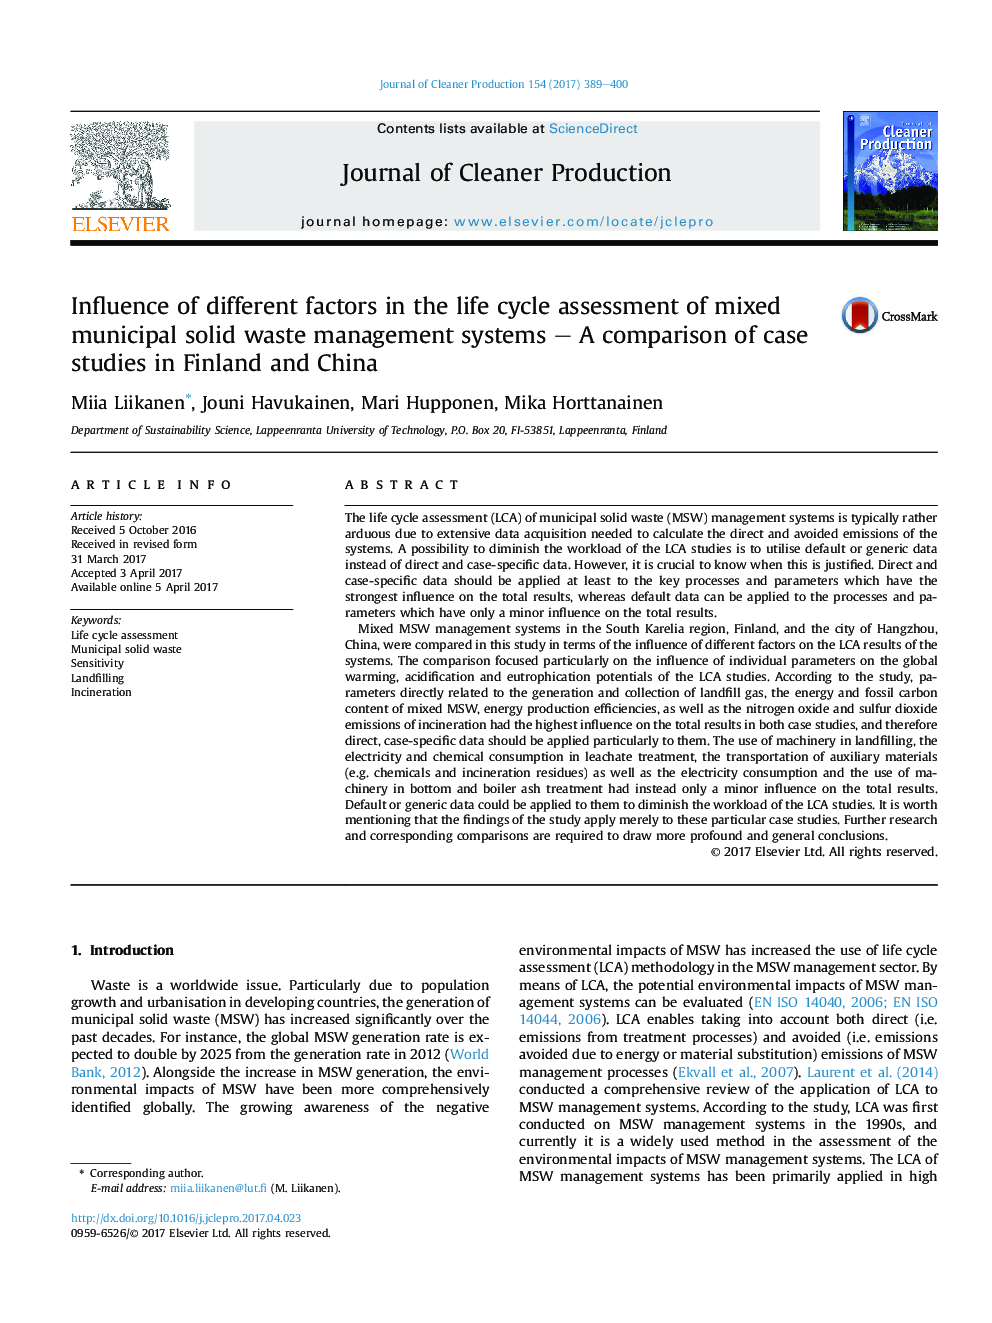 Influence of different factors in the life cycle assessment of mixed municipal solid waste management systems - A comparison of case studies in Finland and China